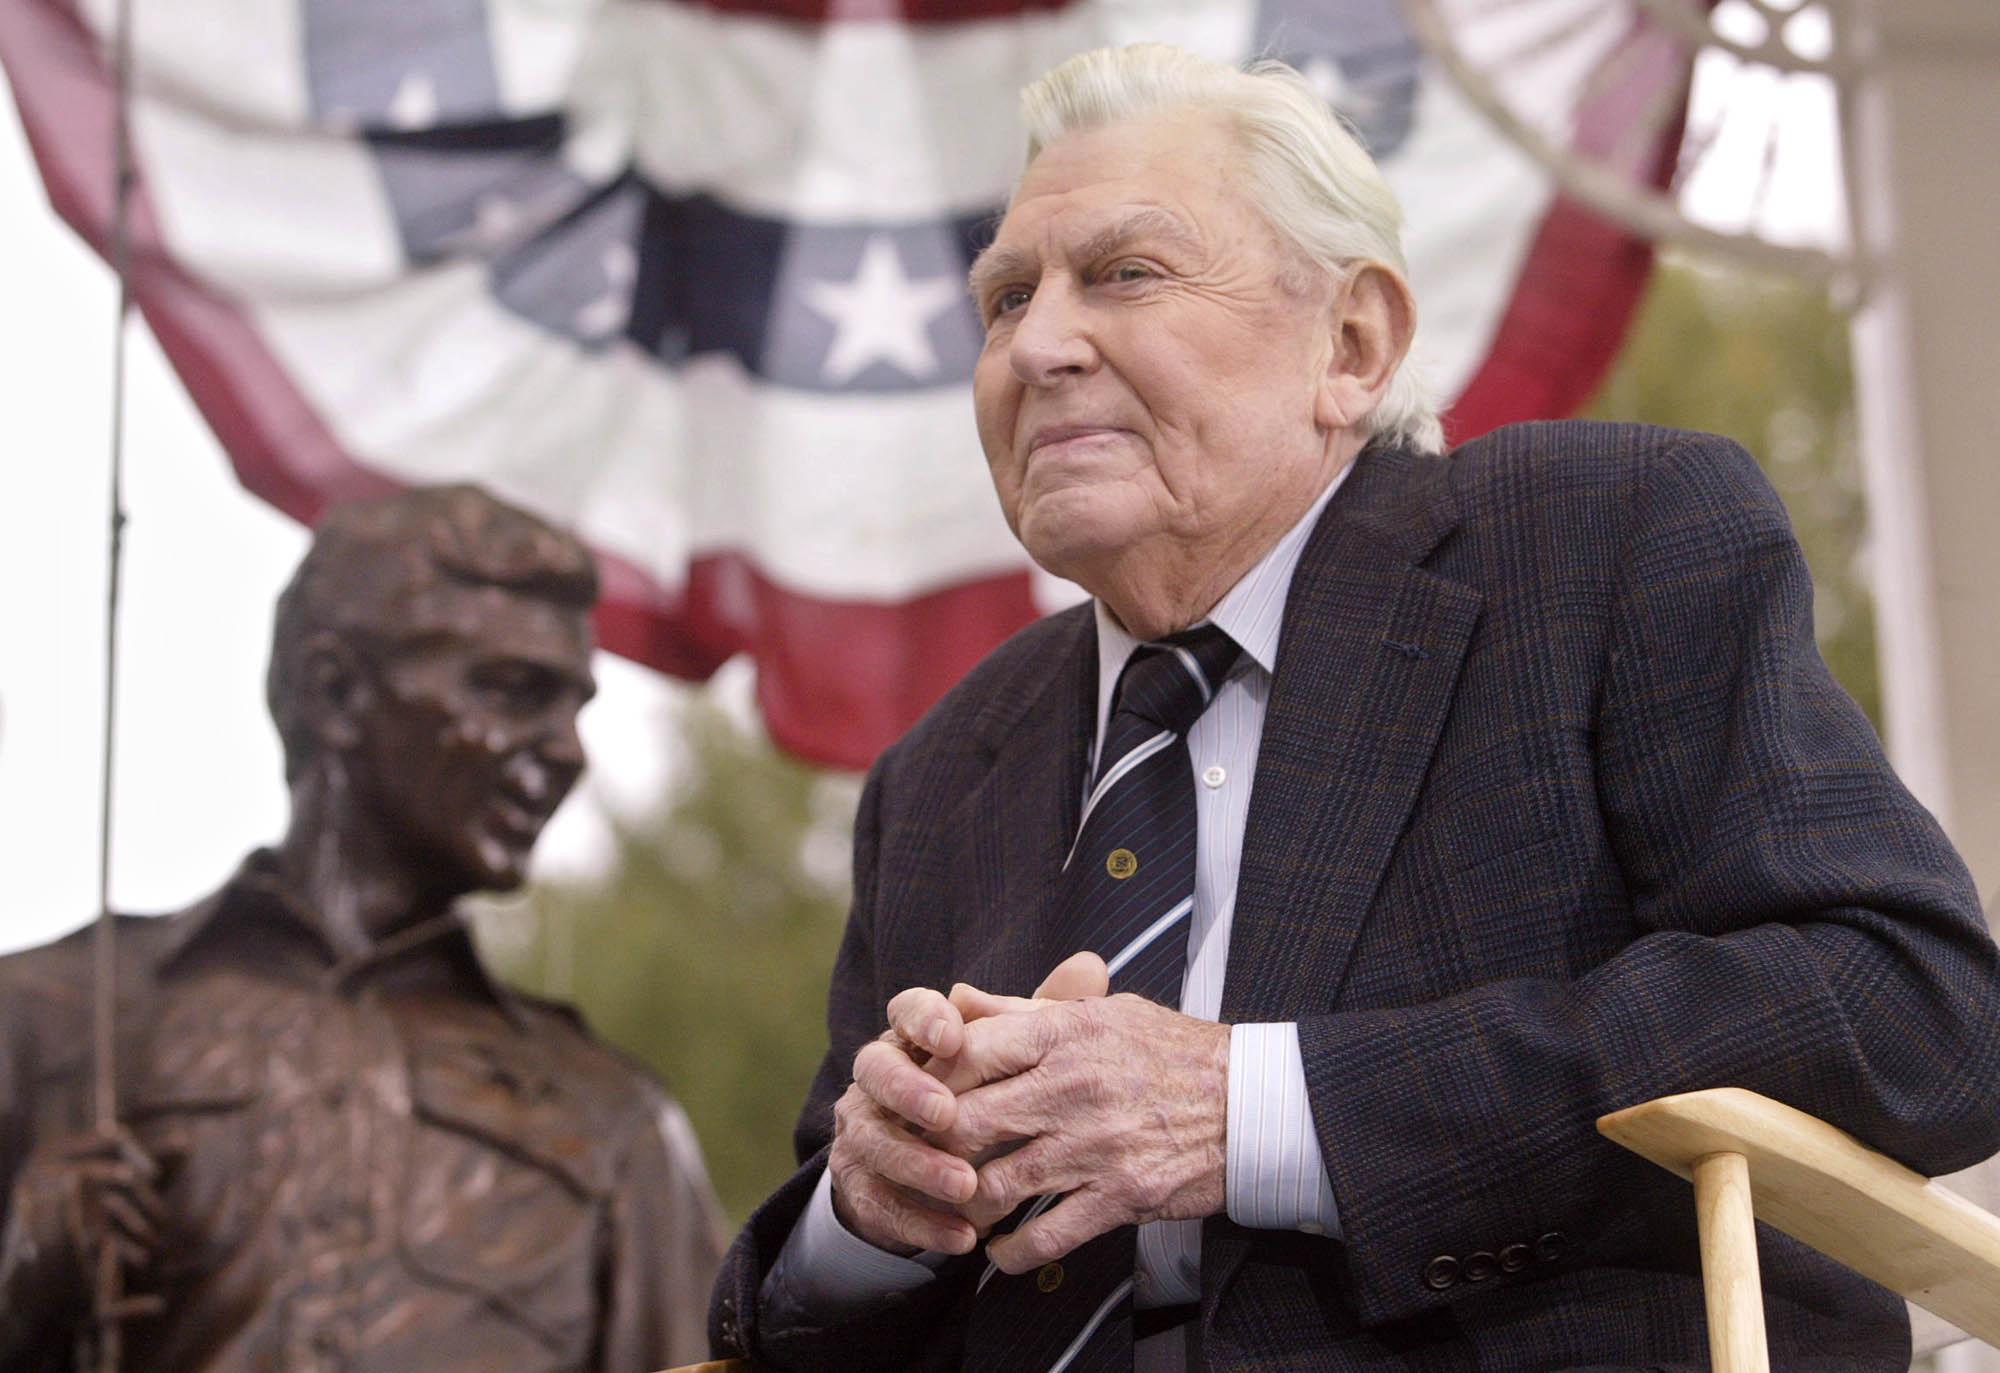 Actor Andy Griffith dies in N. Carolina at age 86 - The Blade